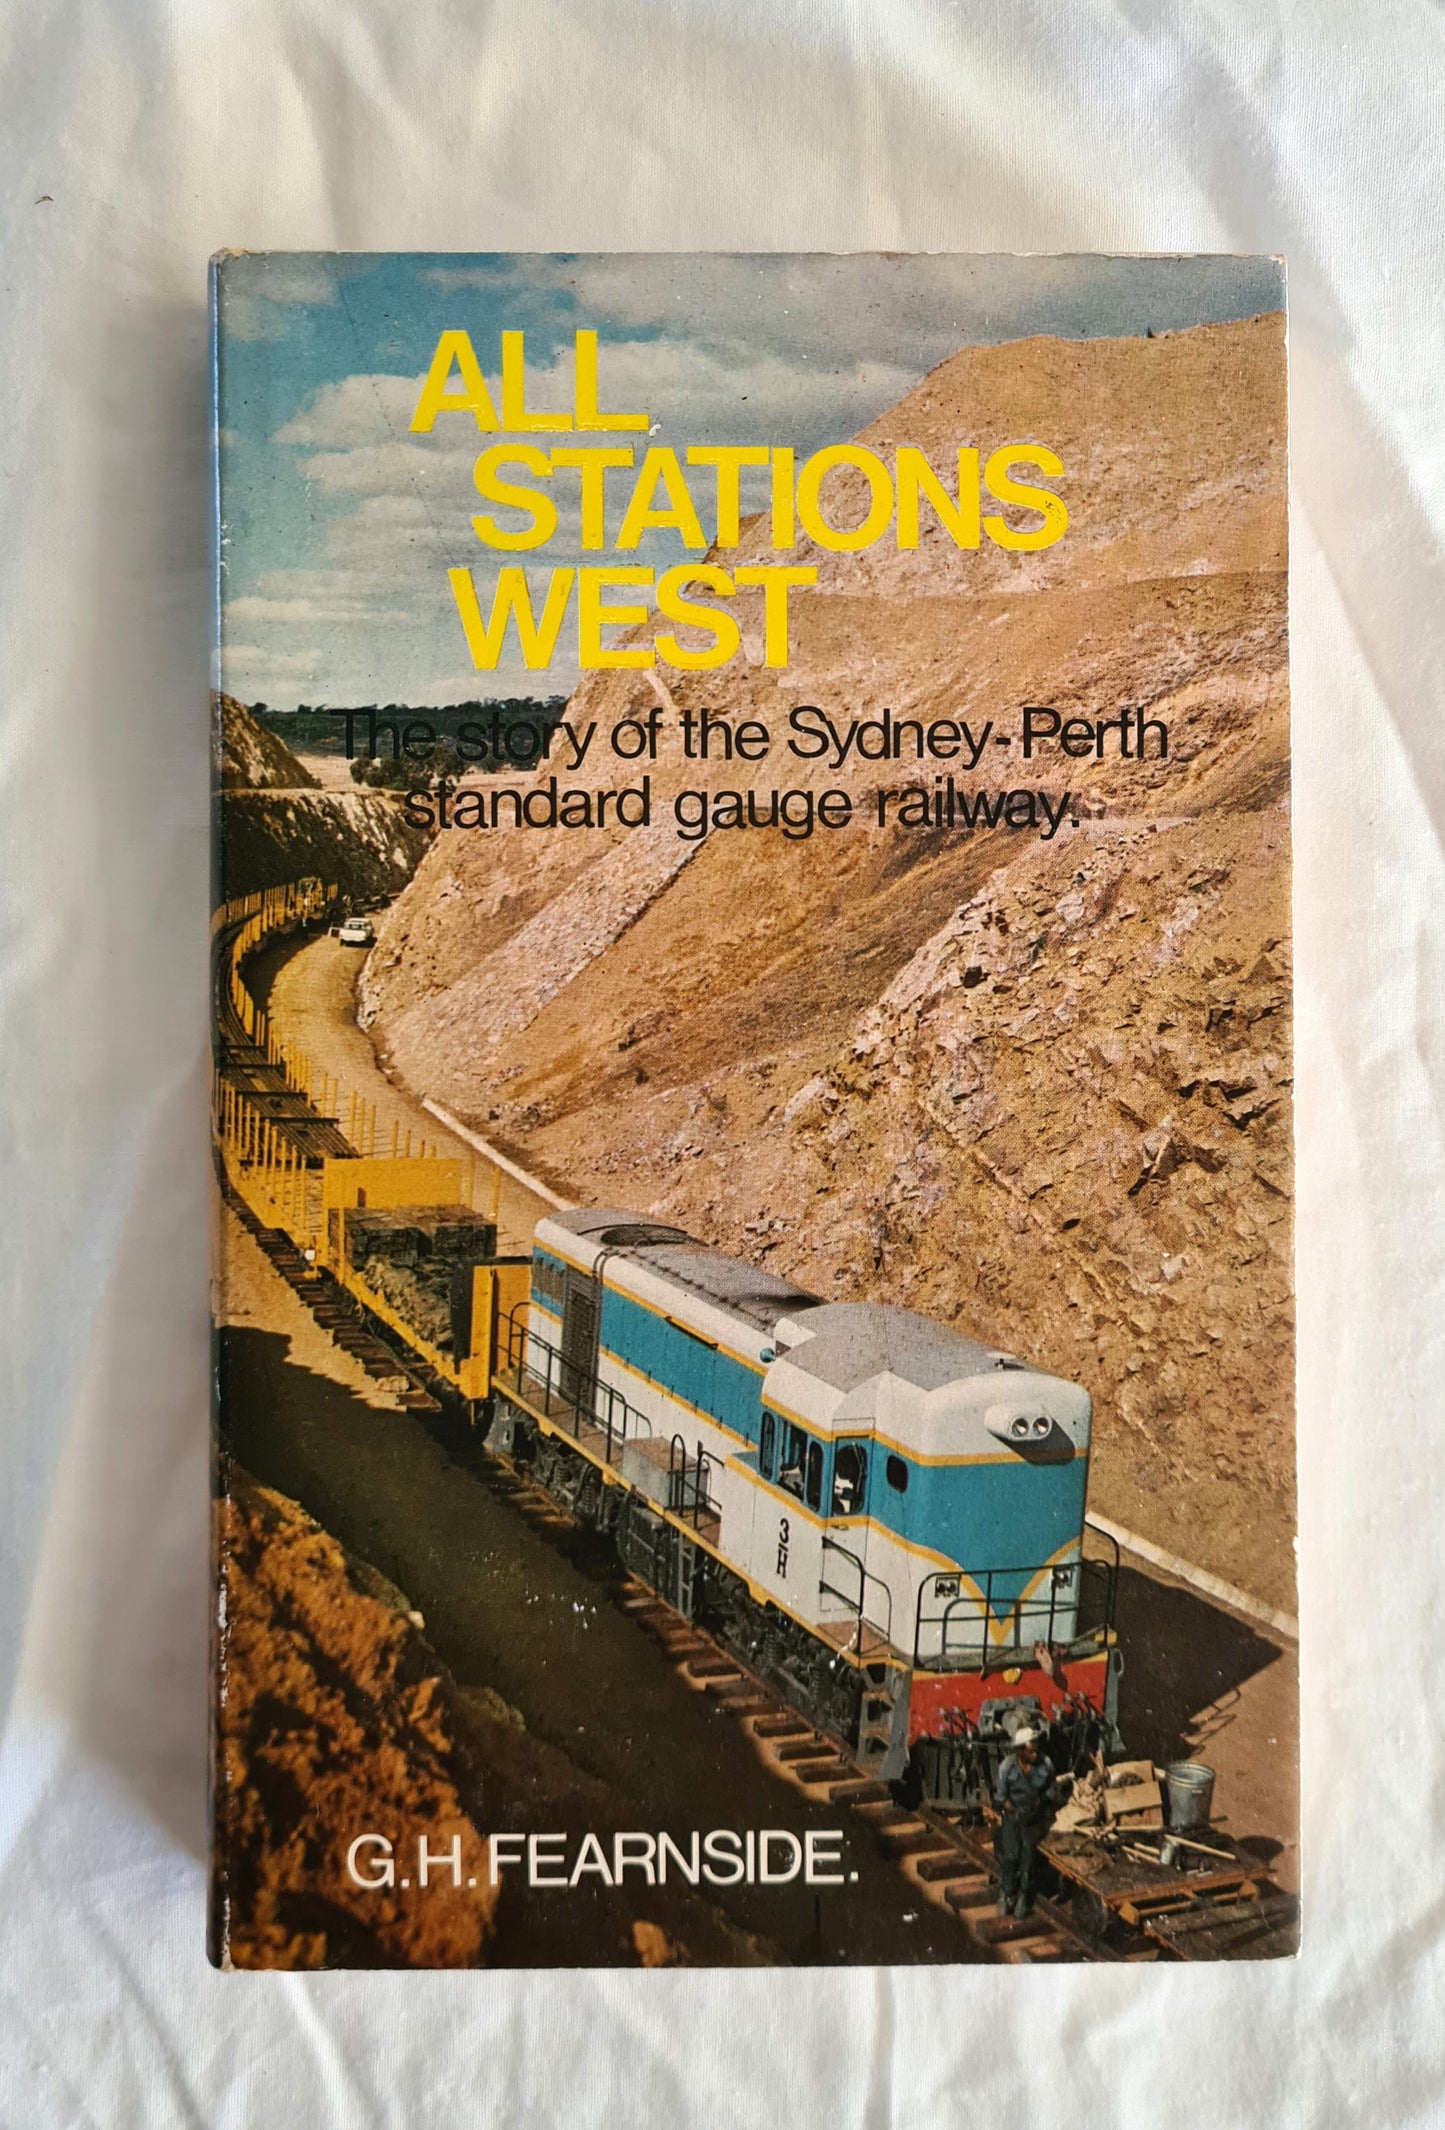 All Stations West  The story of the Sydney-Perth standard gauge railway  by G. H. Fearnside